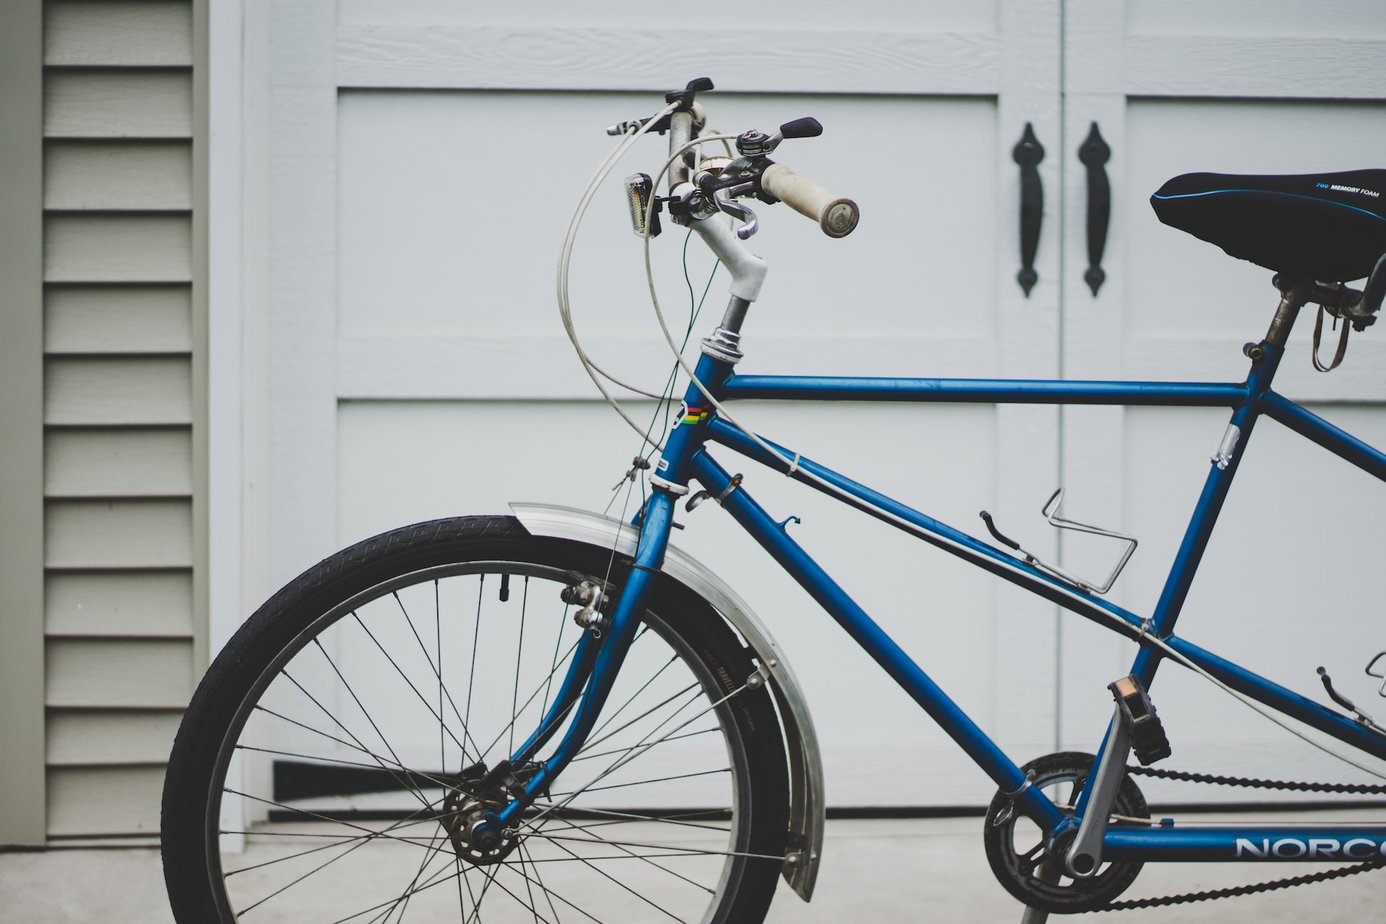 All about proper and safe storage of bicycles in the basement